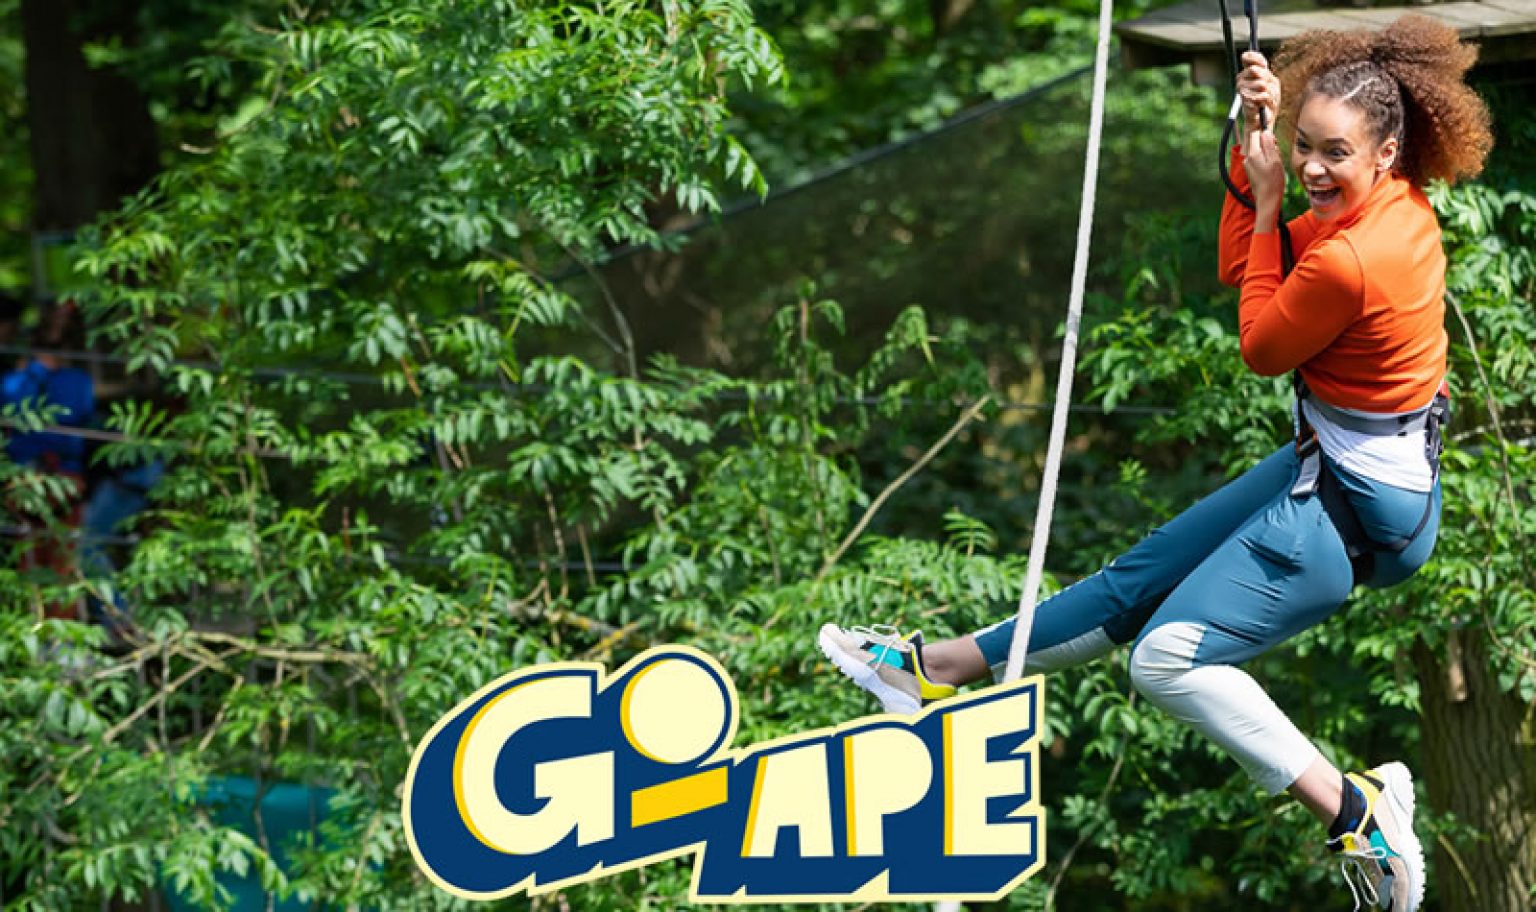 SAVE 15 GO APE + DISCOUNT CODES NHS DISCOUNT OFFERS